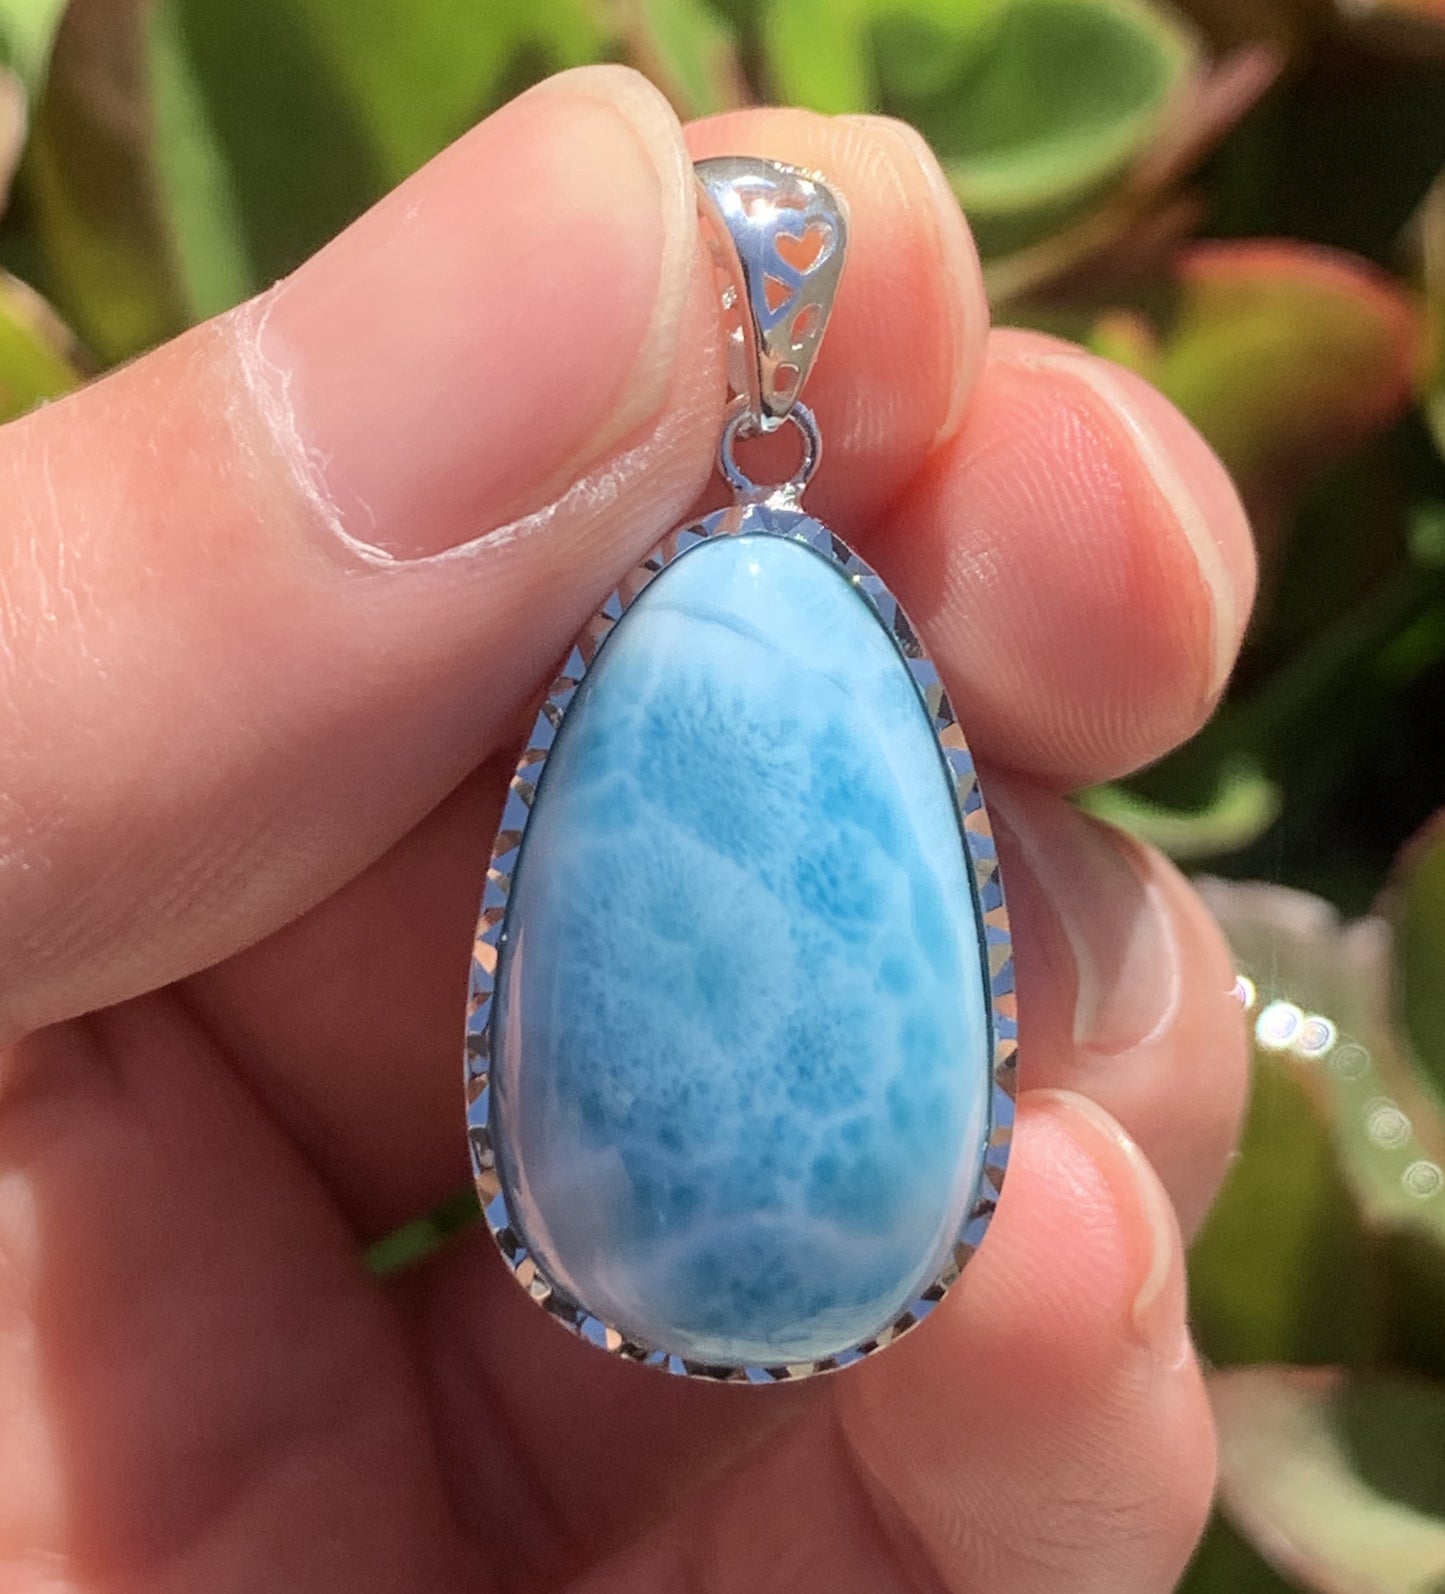 AAA+ Natural  Authentic Dominican Larimar 925 Silver Pendant, Handmade Silver Pendant,Lairmar Jewelry ET292